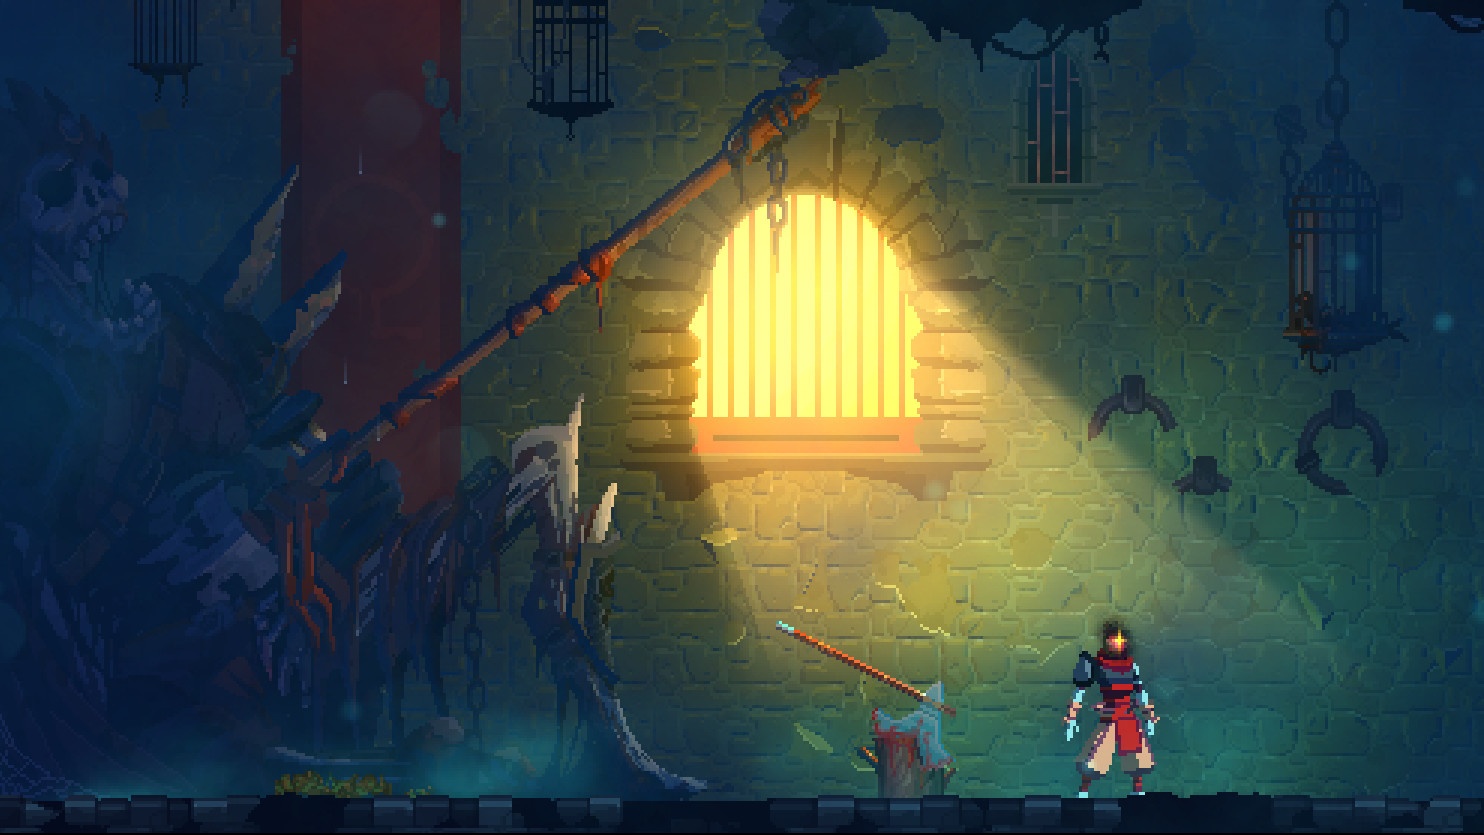 2D, Action, Dead Cells, Dead Cells Review, indie, Metroidvania, Motion Twin, Pixel Art, Pixel Graphics, PS4, PS4 Reviews, Rogue-like, Roguelike